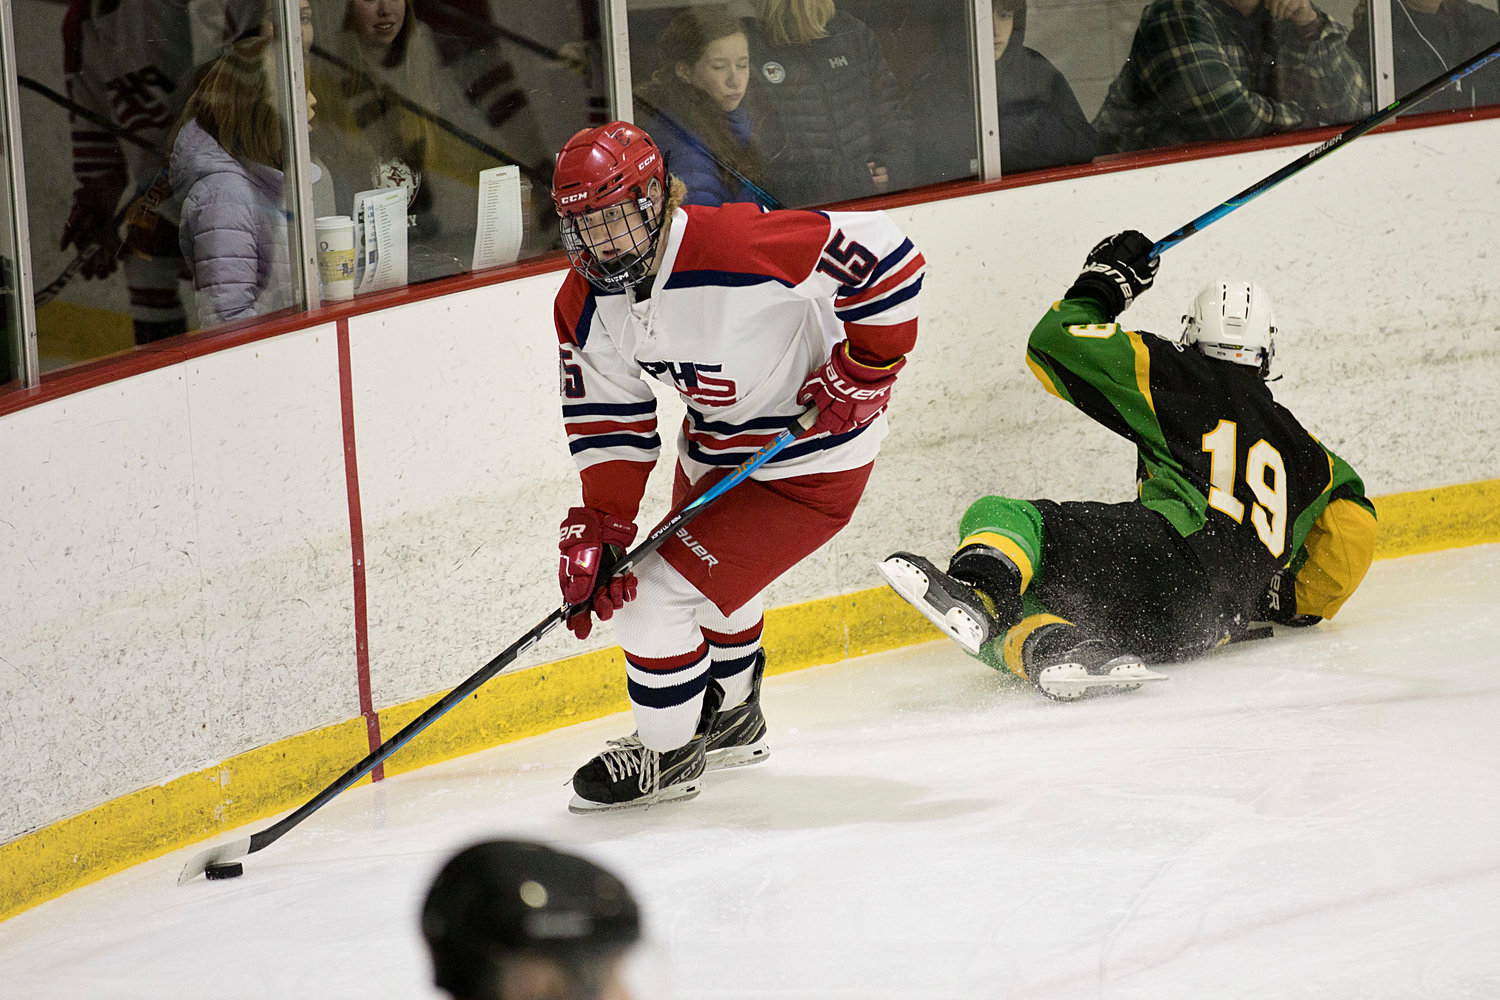 Shane Temple leaves his opponent in the shavings to take control of the puck.